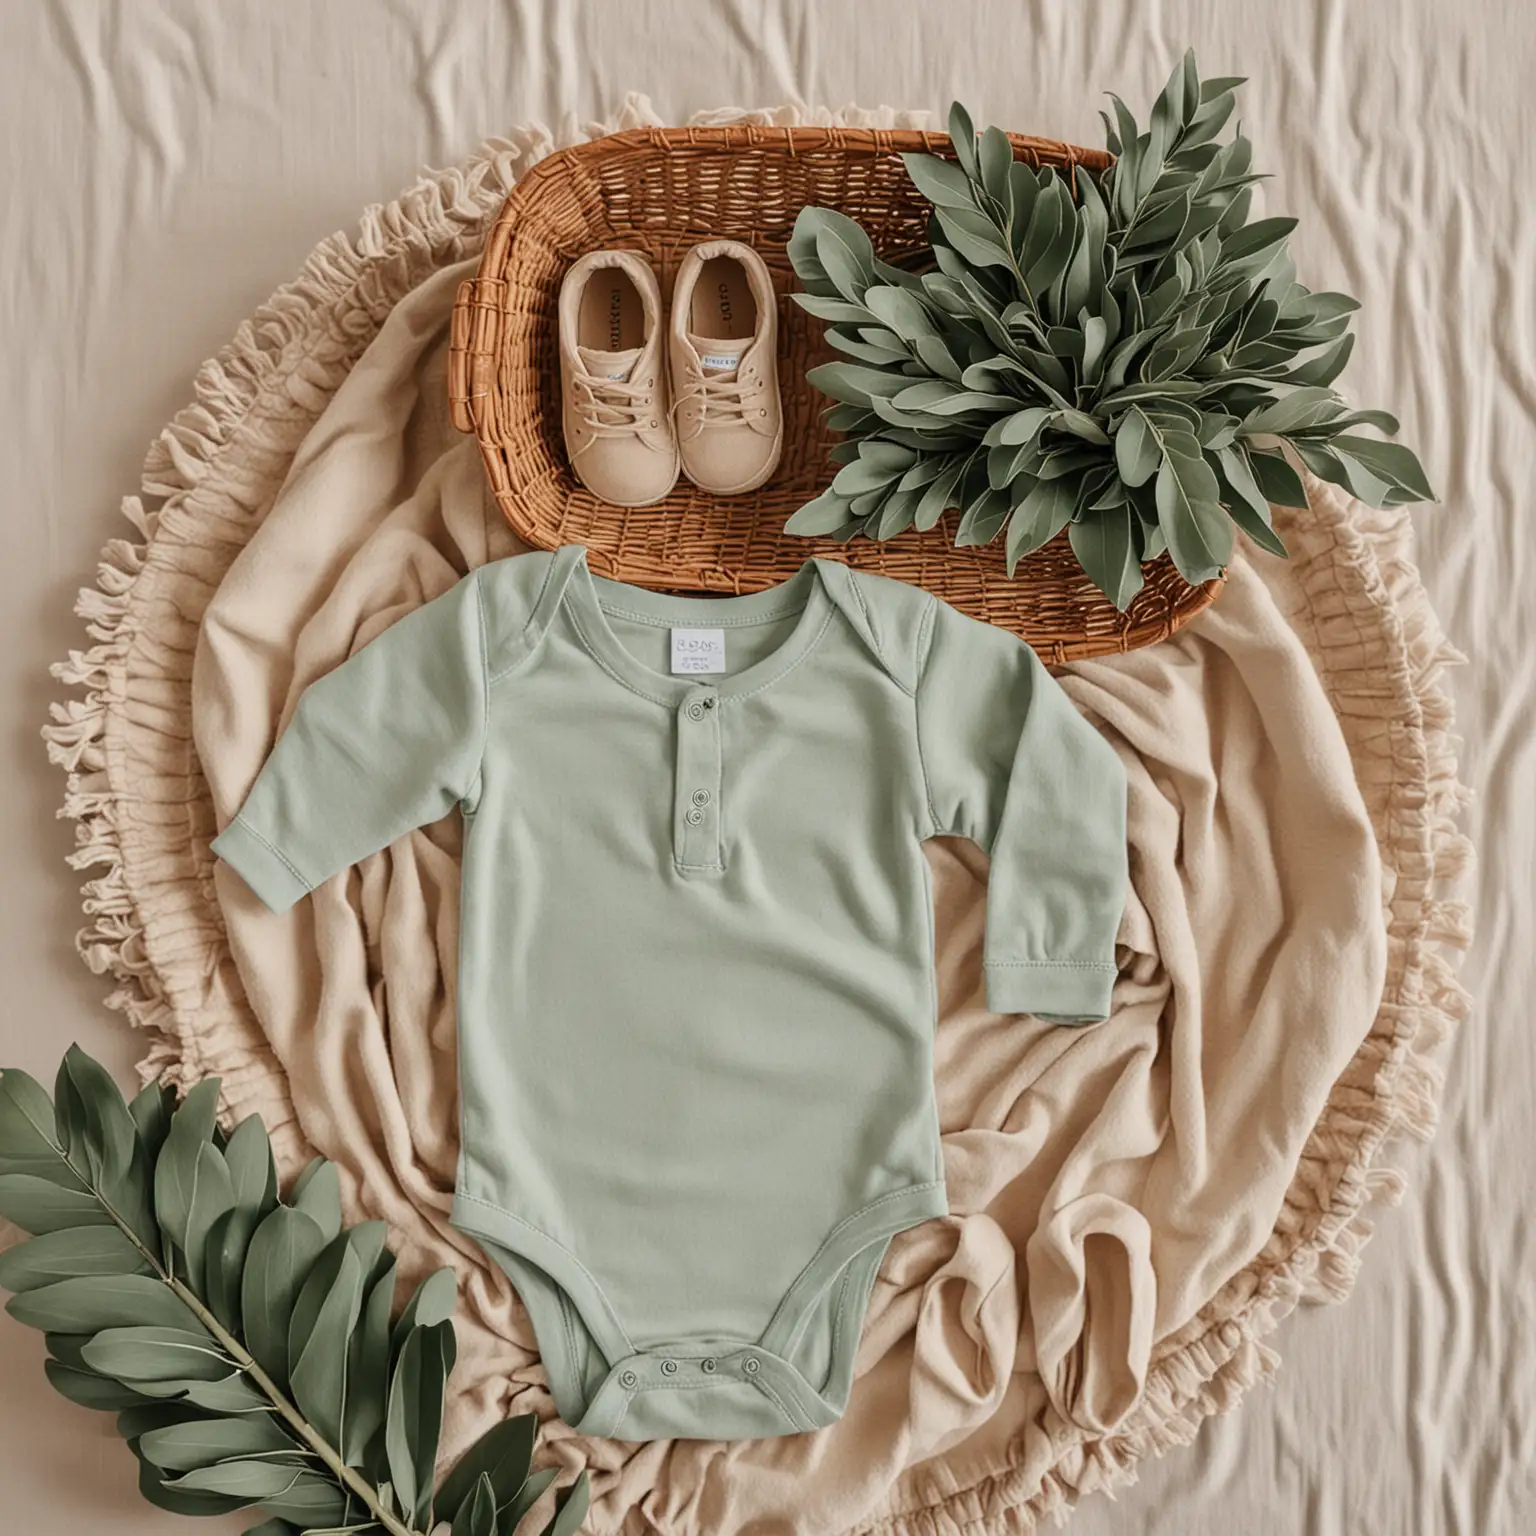 Flat Lay Baby Essentials Cane Basket Onesie Shoes Foliage and Blanket